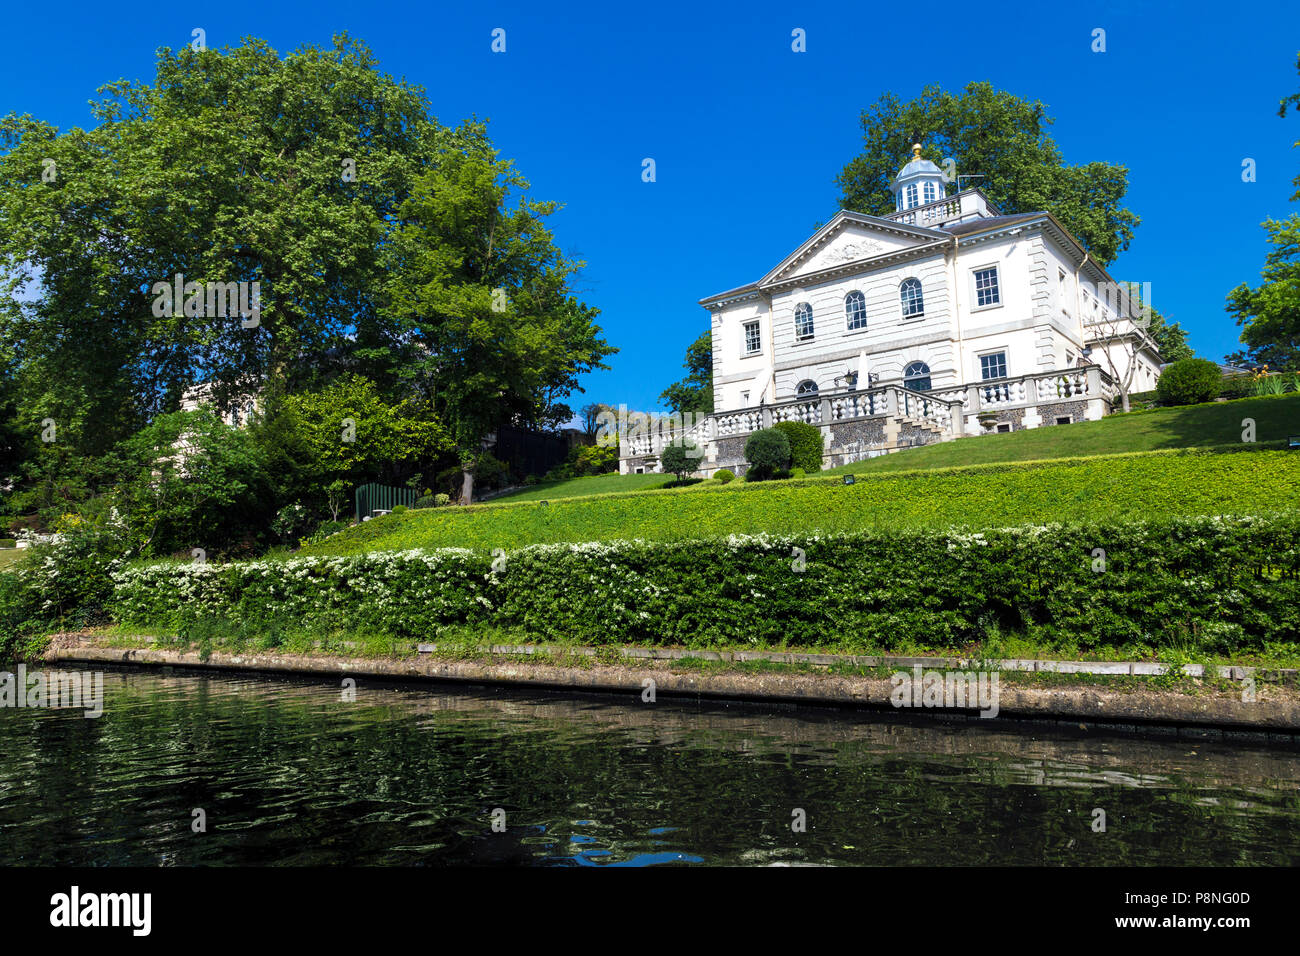 A canalside mansion in Little Venice, London, UK Stock Photo